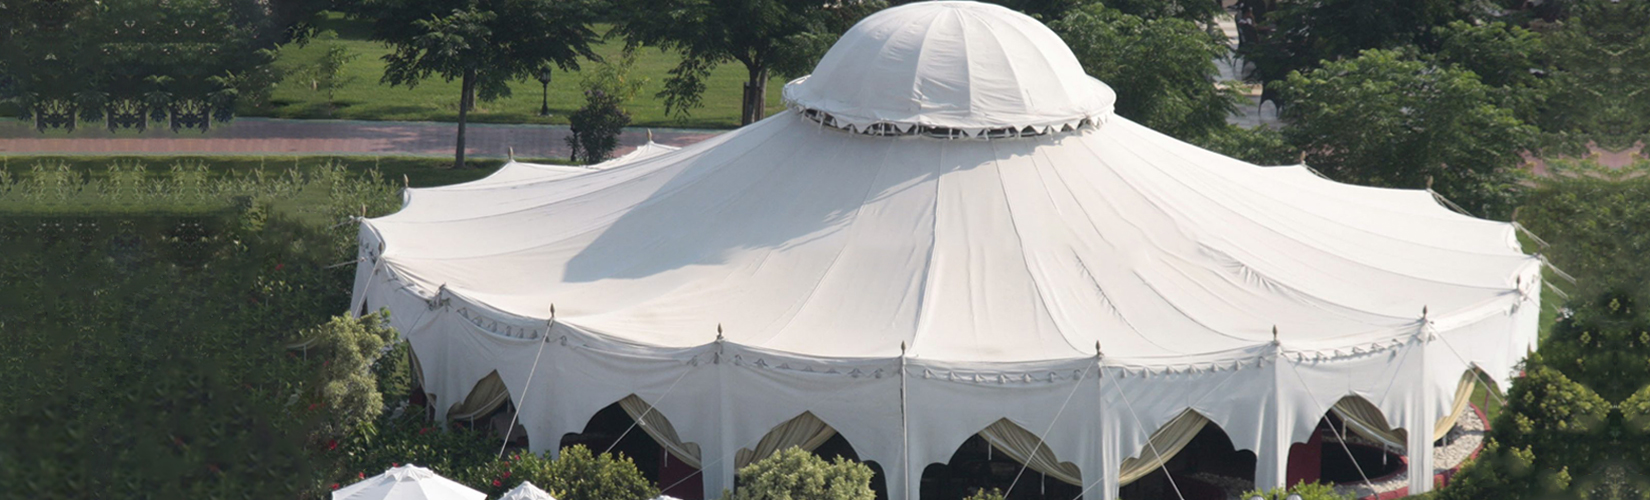 Round Dome Tents